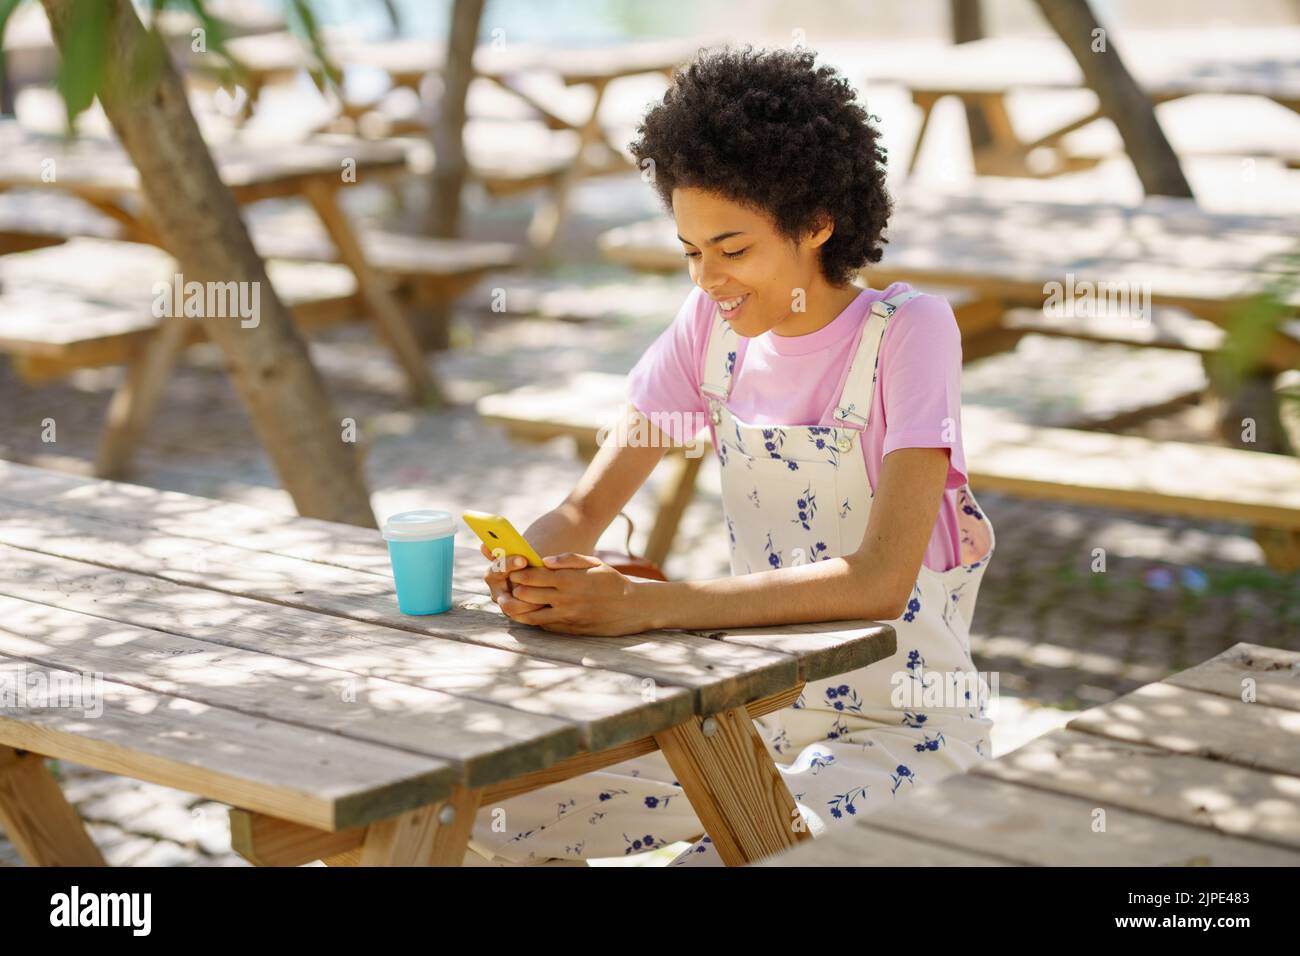 Content black woman surfing cellphone at wooden table Stock Photo